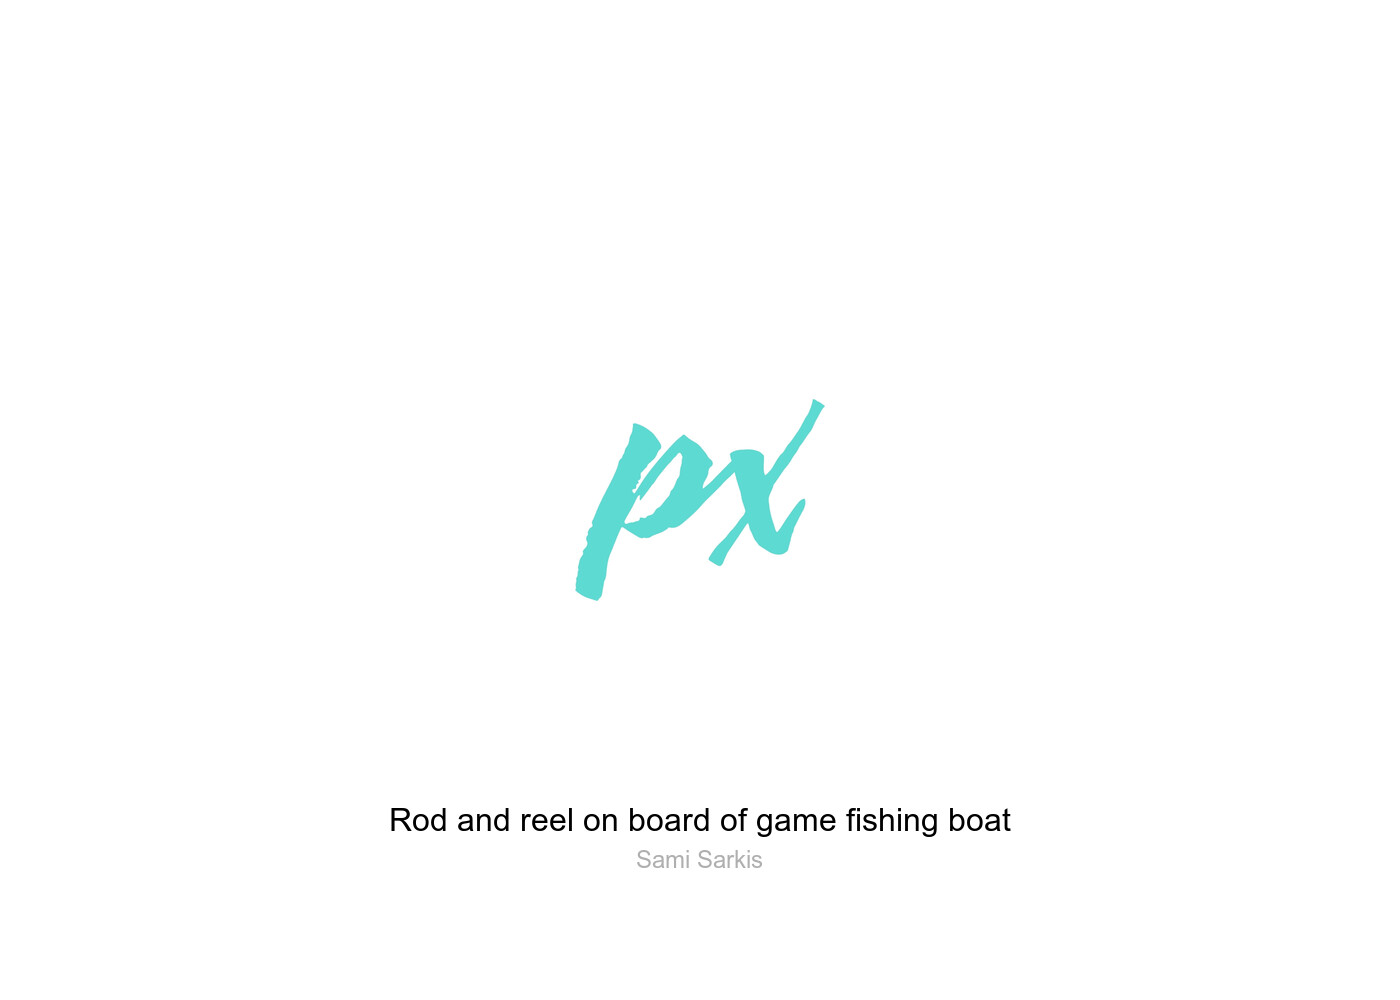 Two rod and reels on board a game fishing boat in the Mediterranean Sea  Photograph by Sami Sarkis - Pixels